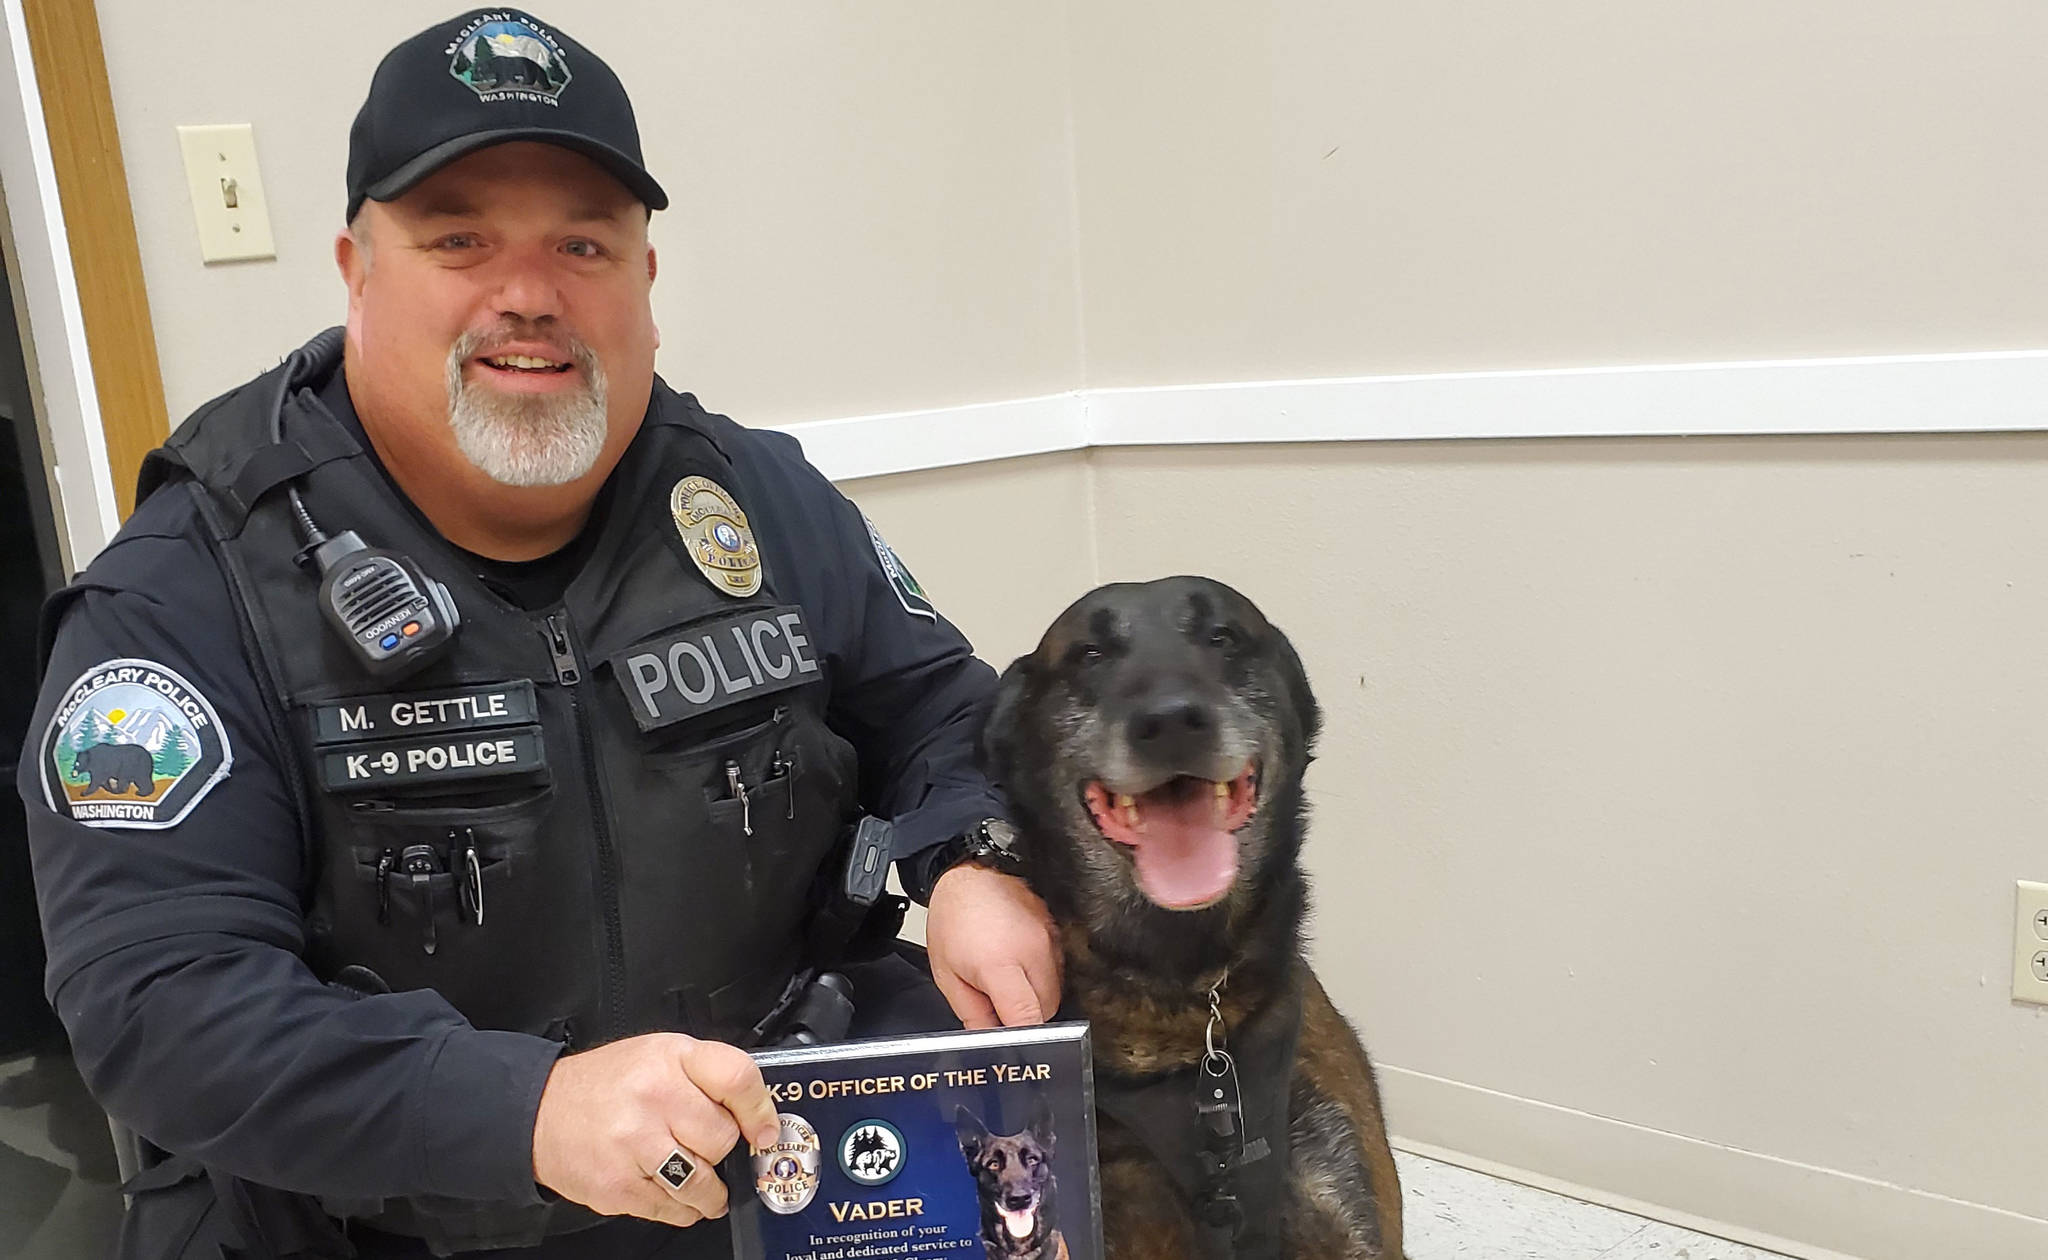 K-9 Vader gracious in receiving McCleary’s Officer of the Year award